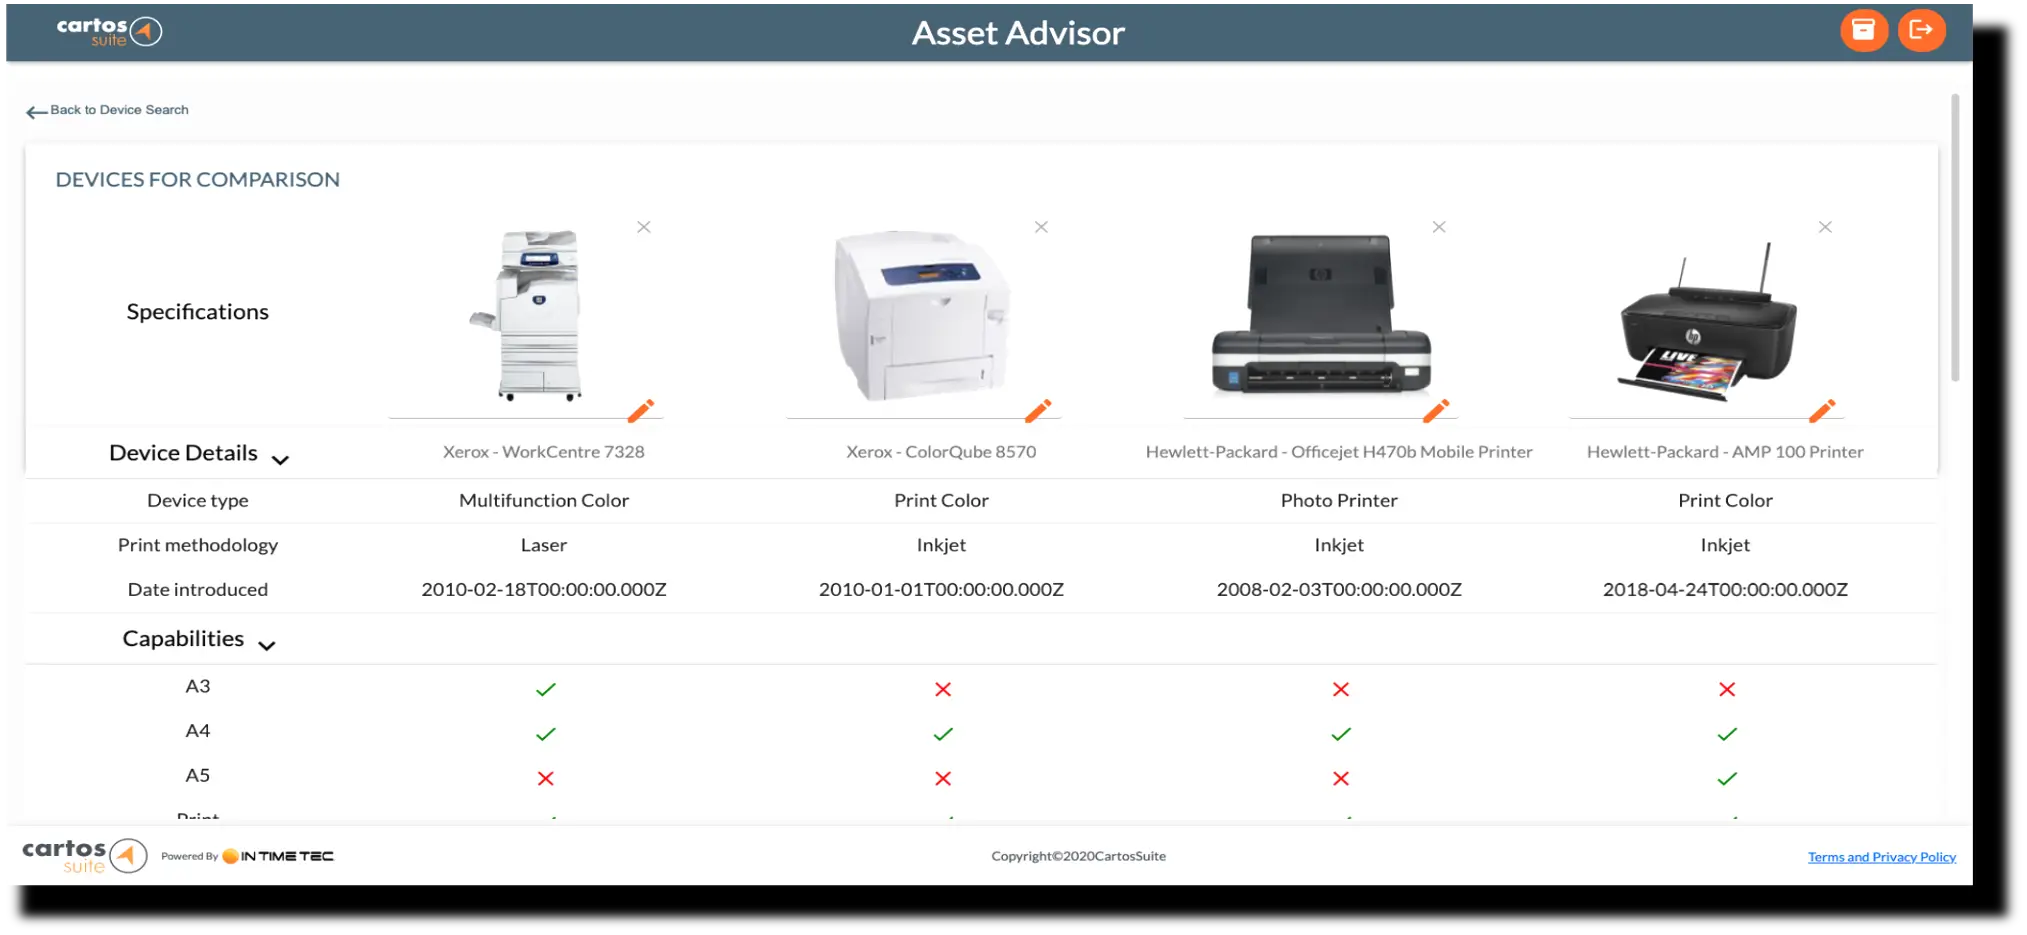 With Asset Advisor you will have less guessing and more confidence in the specs of your printing device